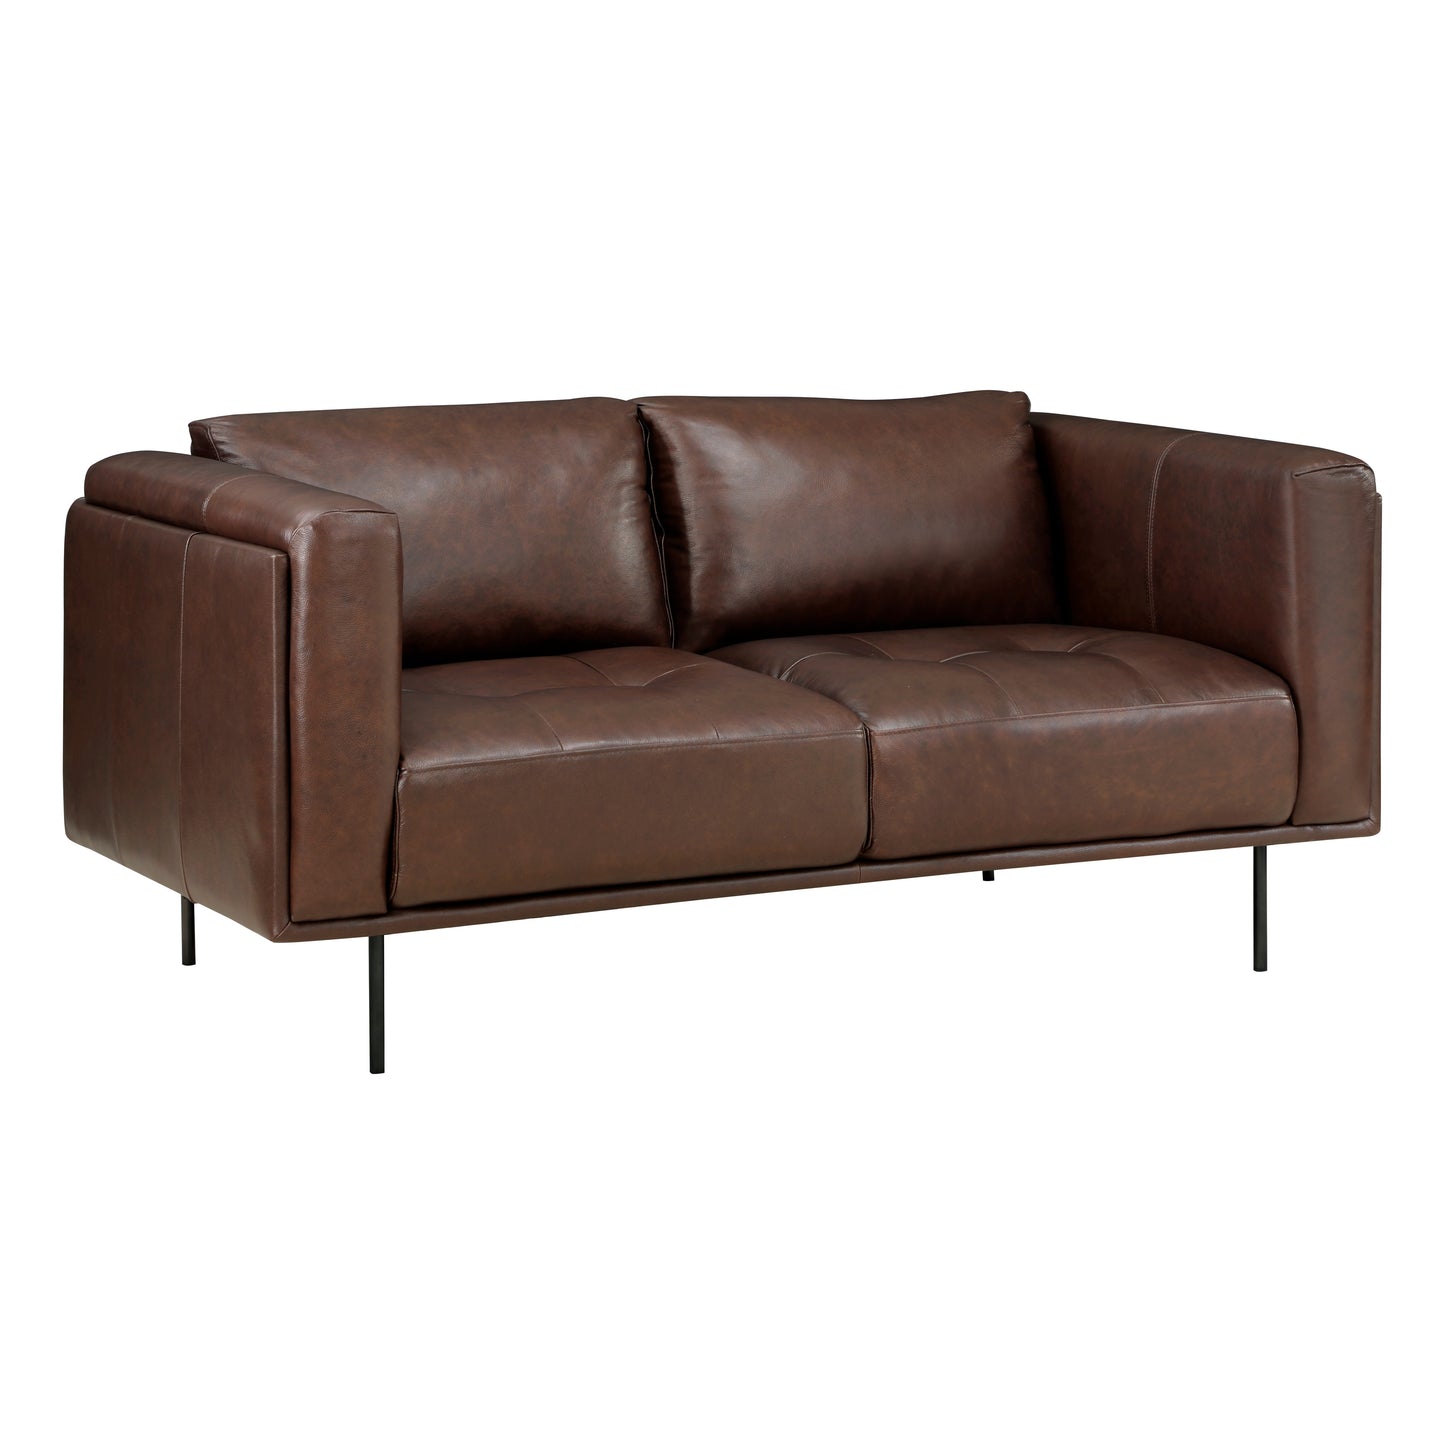 Soren Top Grain Leather Sofa BROWN ONLY 100% LEATHER